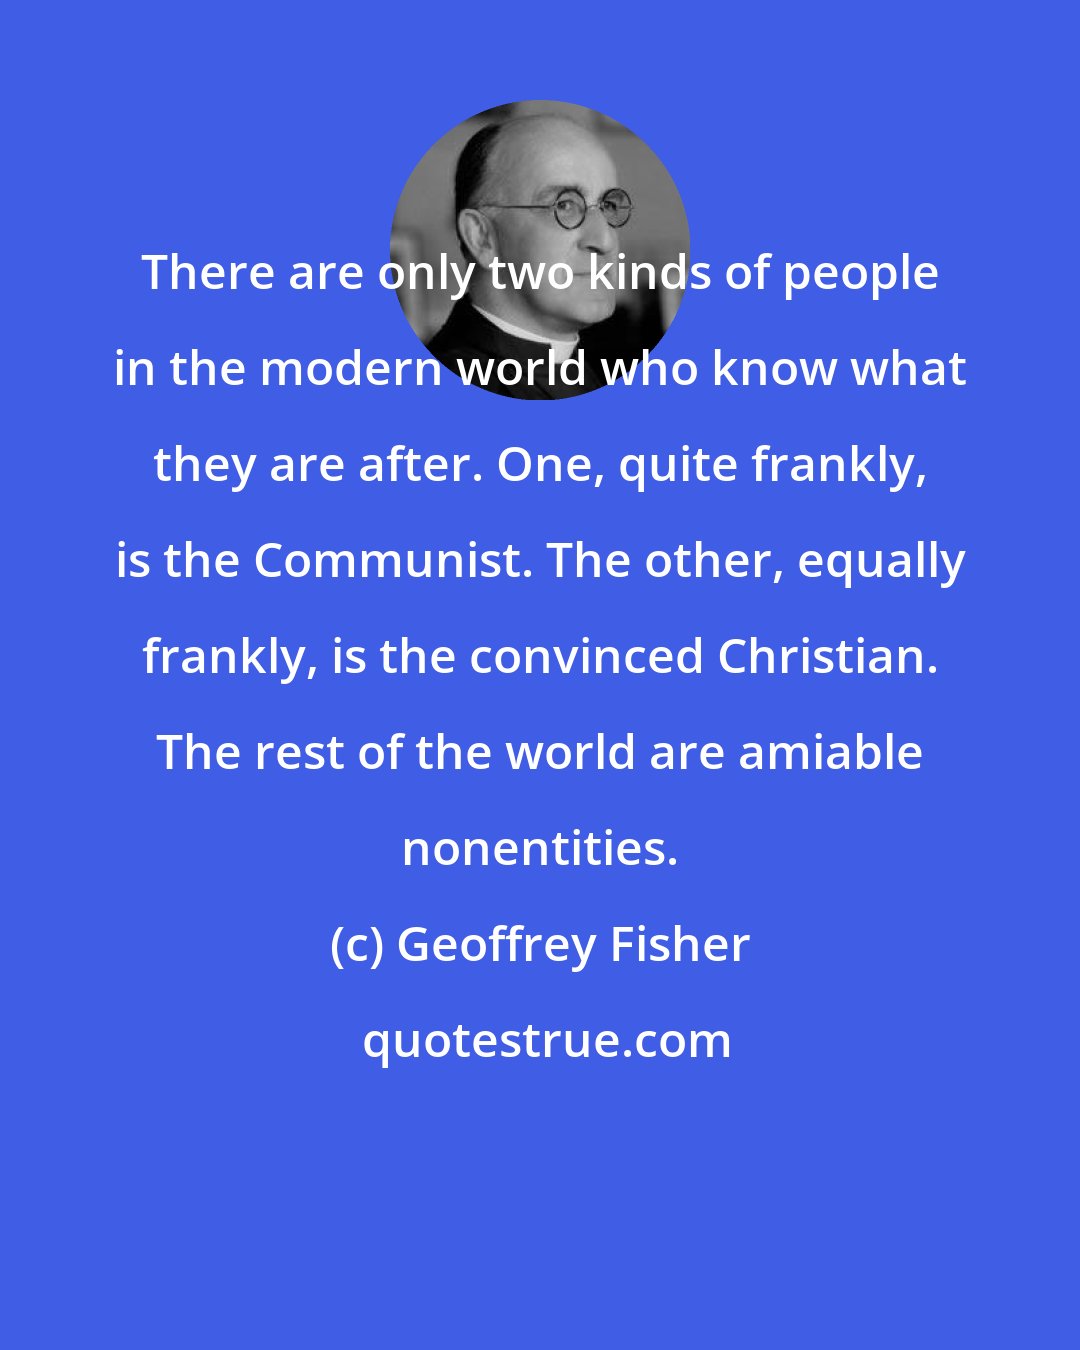 Geoffrey Fisher: There are only two kinds of people in the modern world who know what they are after. One, quite frankly, is the Communist. The other, equally frankly, is the convinced Christian. The rest of the world are amiable nonentities.